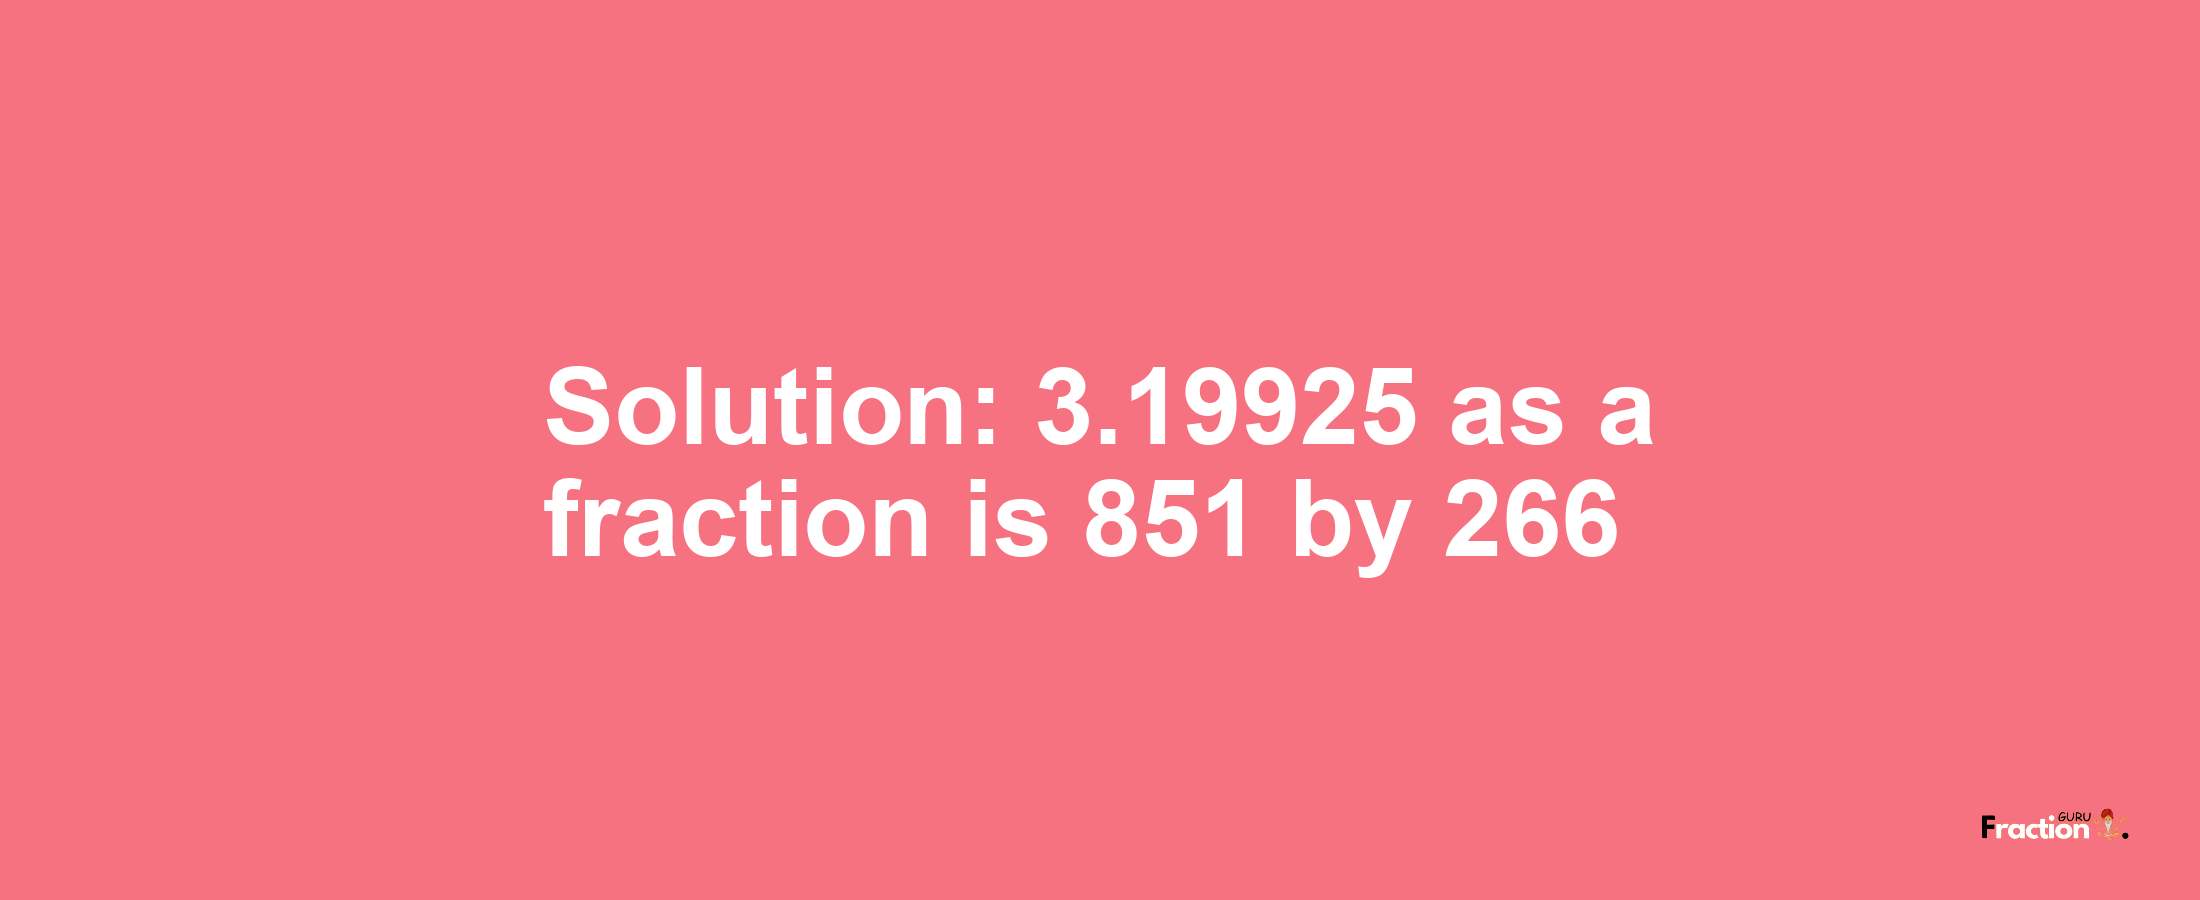 Solution:3.19925 as a fraction is 851/266